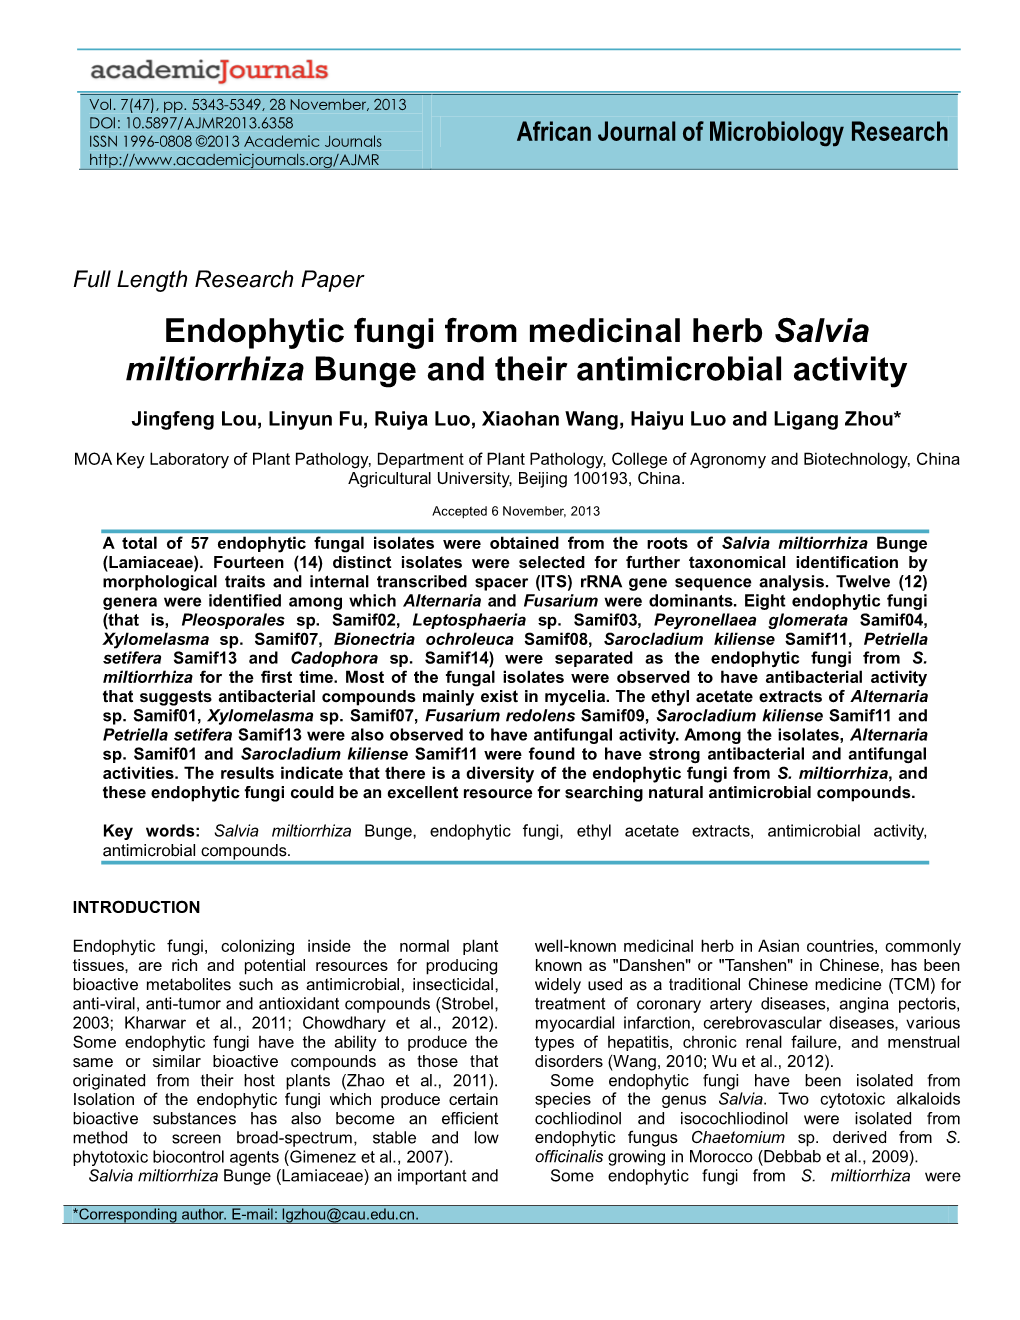 Endophytic Fungi from Medicinal Herb Salvia Miltiorrhiza Bunge and Their Antimicrobial Activity